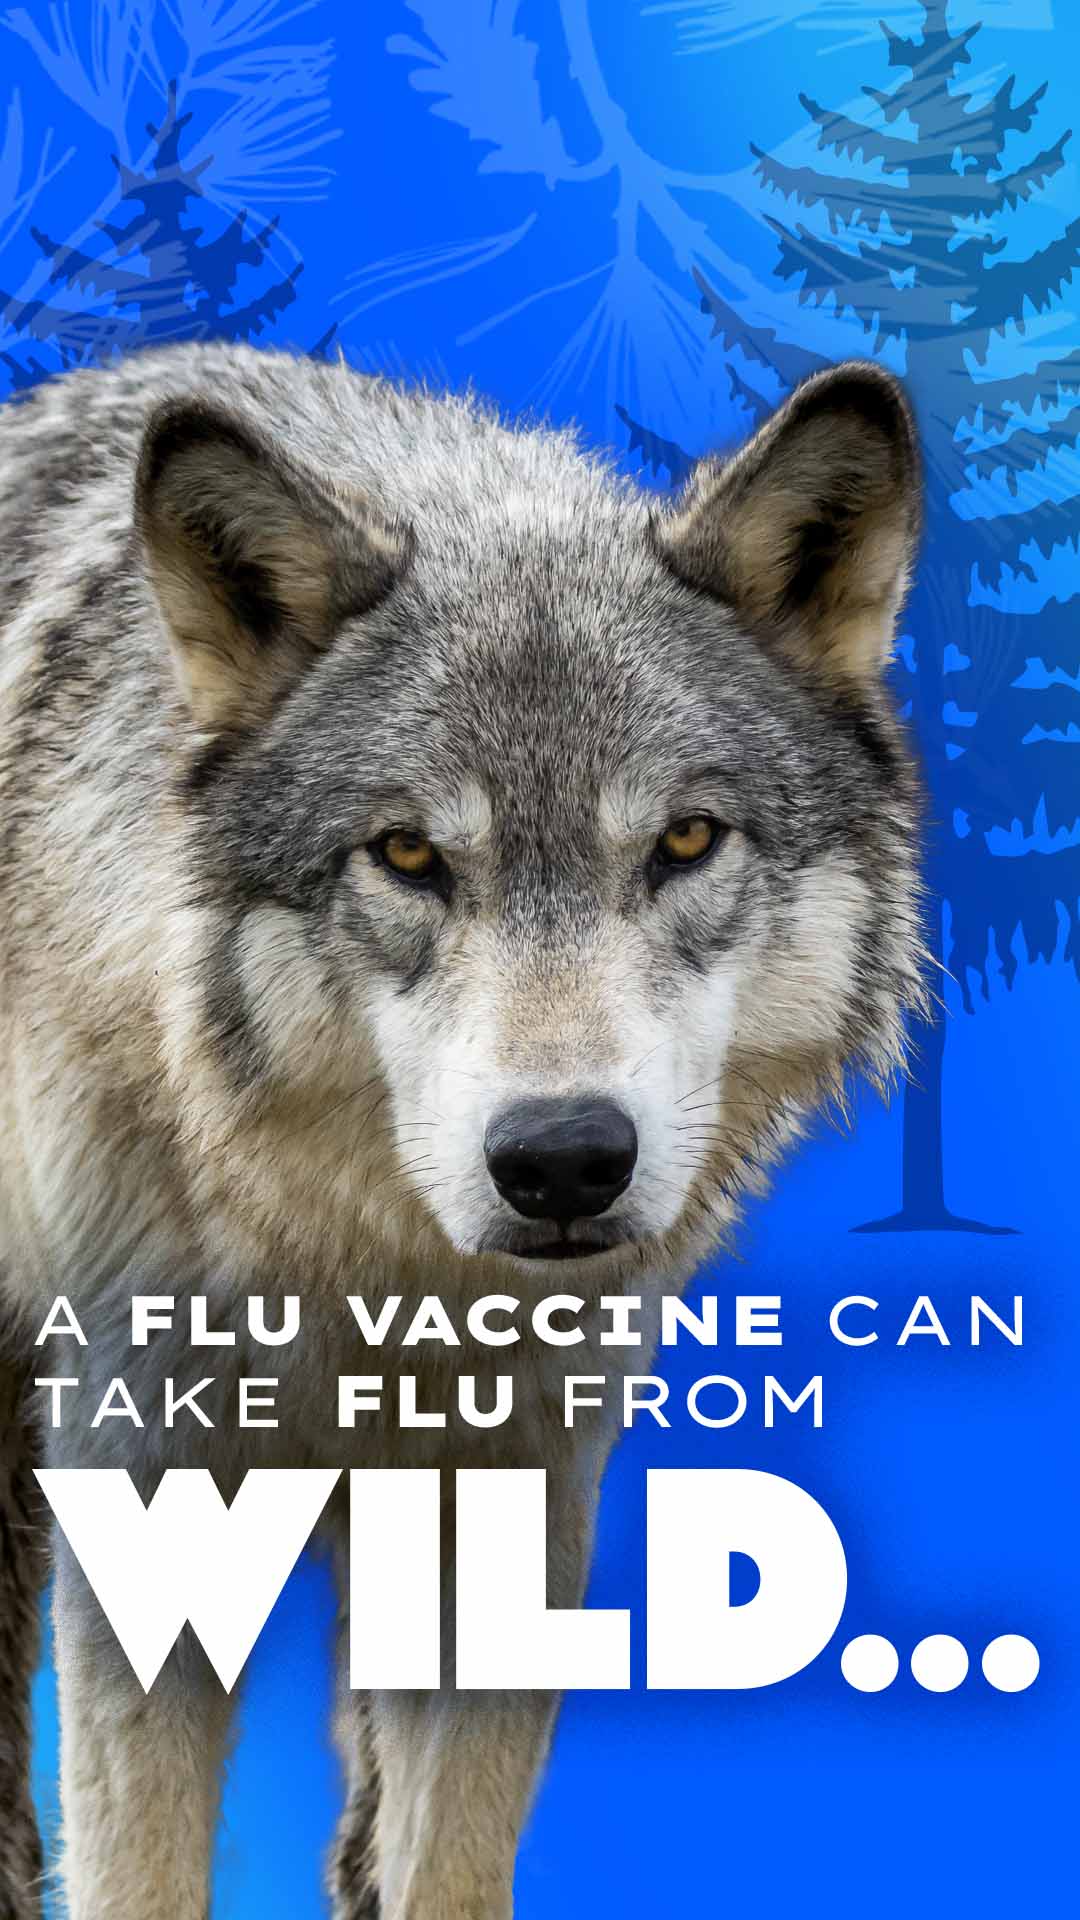 wolf with text: a flu vaccine can take flu from wild